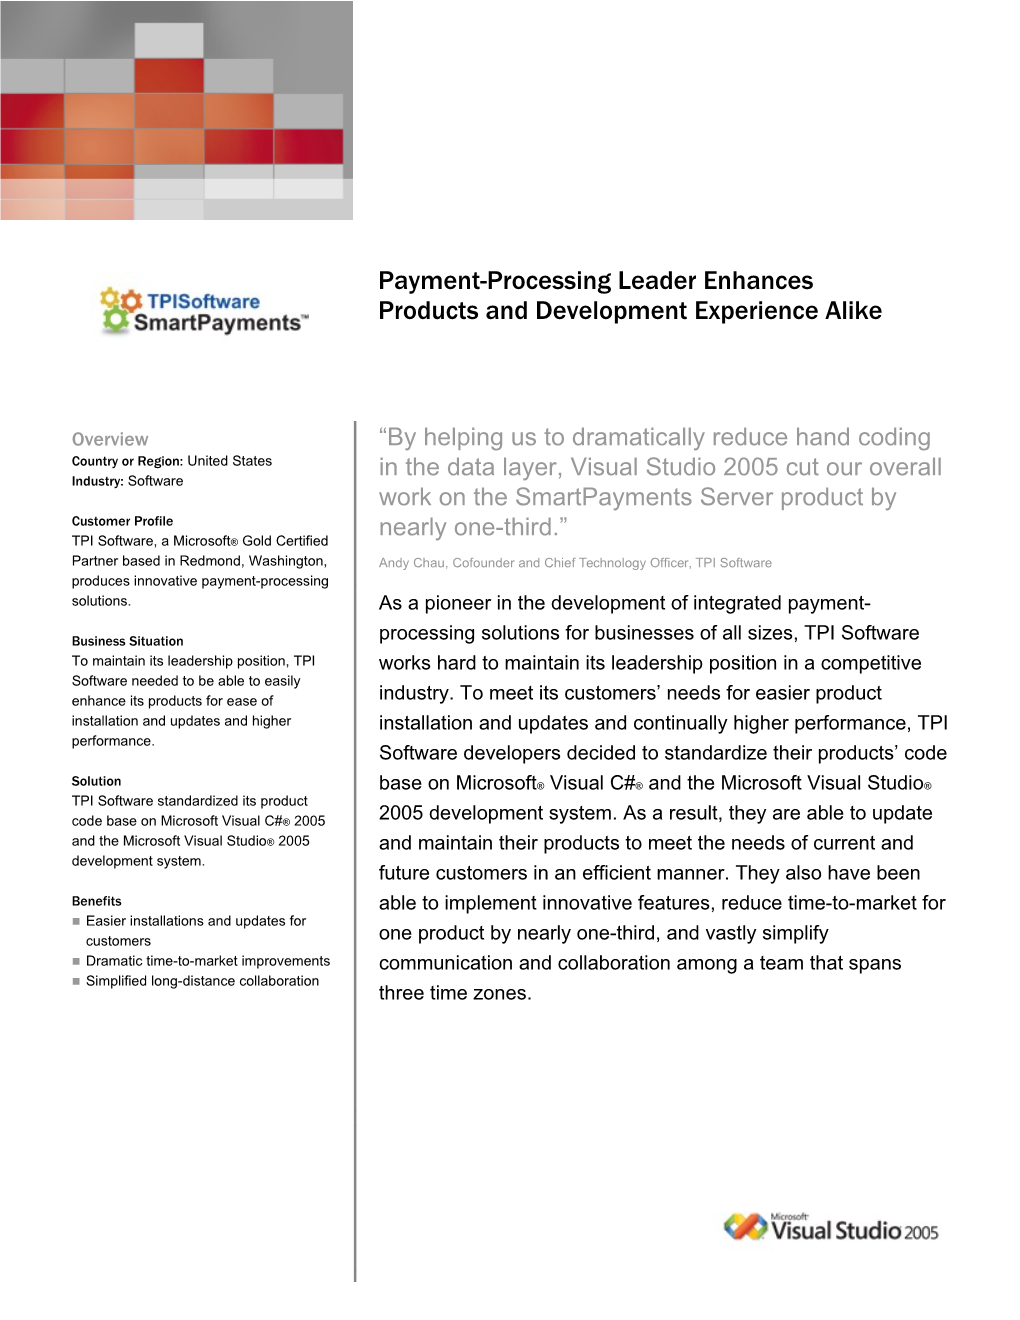 Payment-Processing Leader Enhances Products and Development Experience Alike